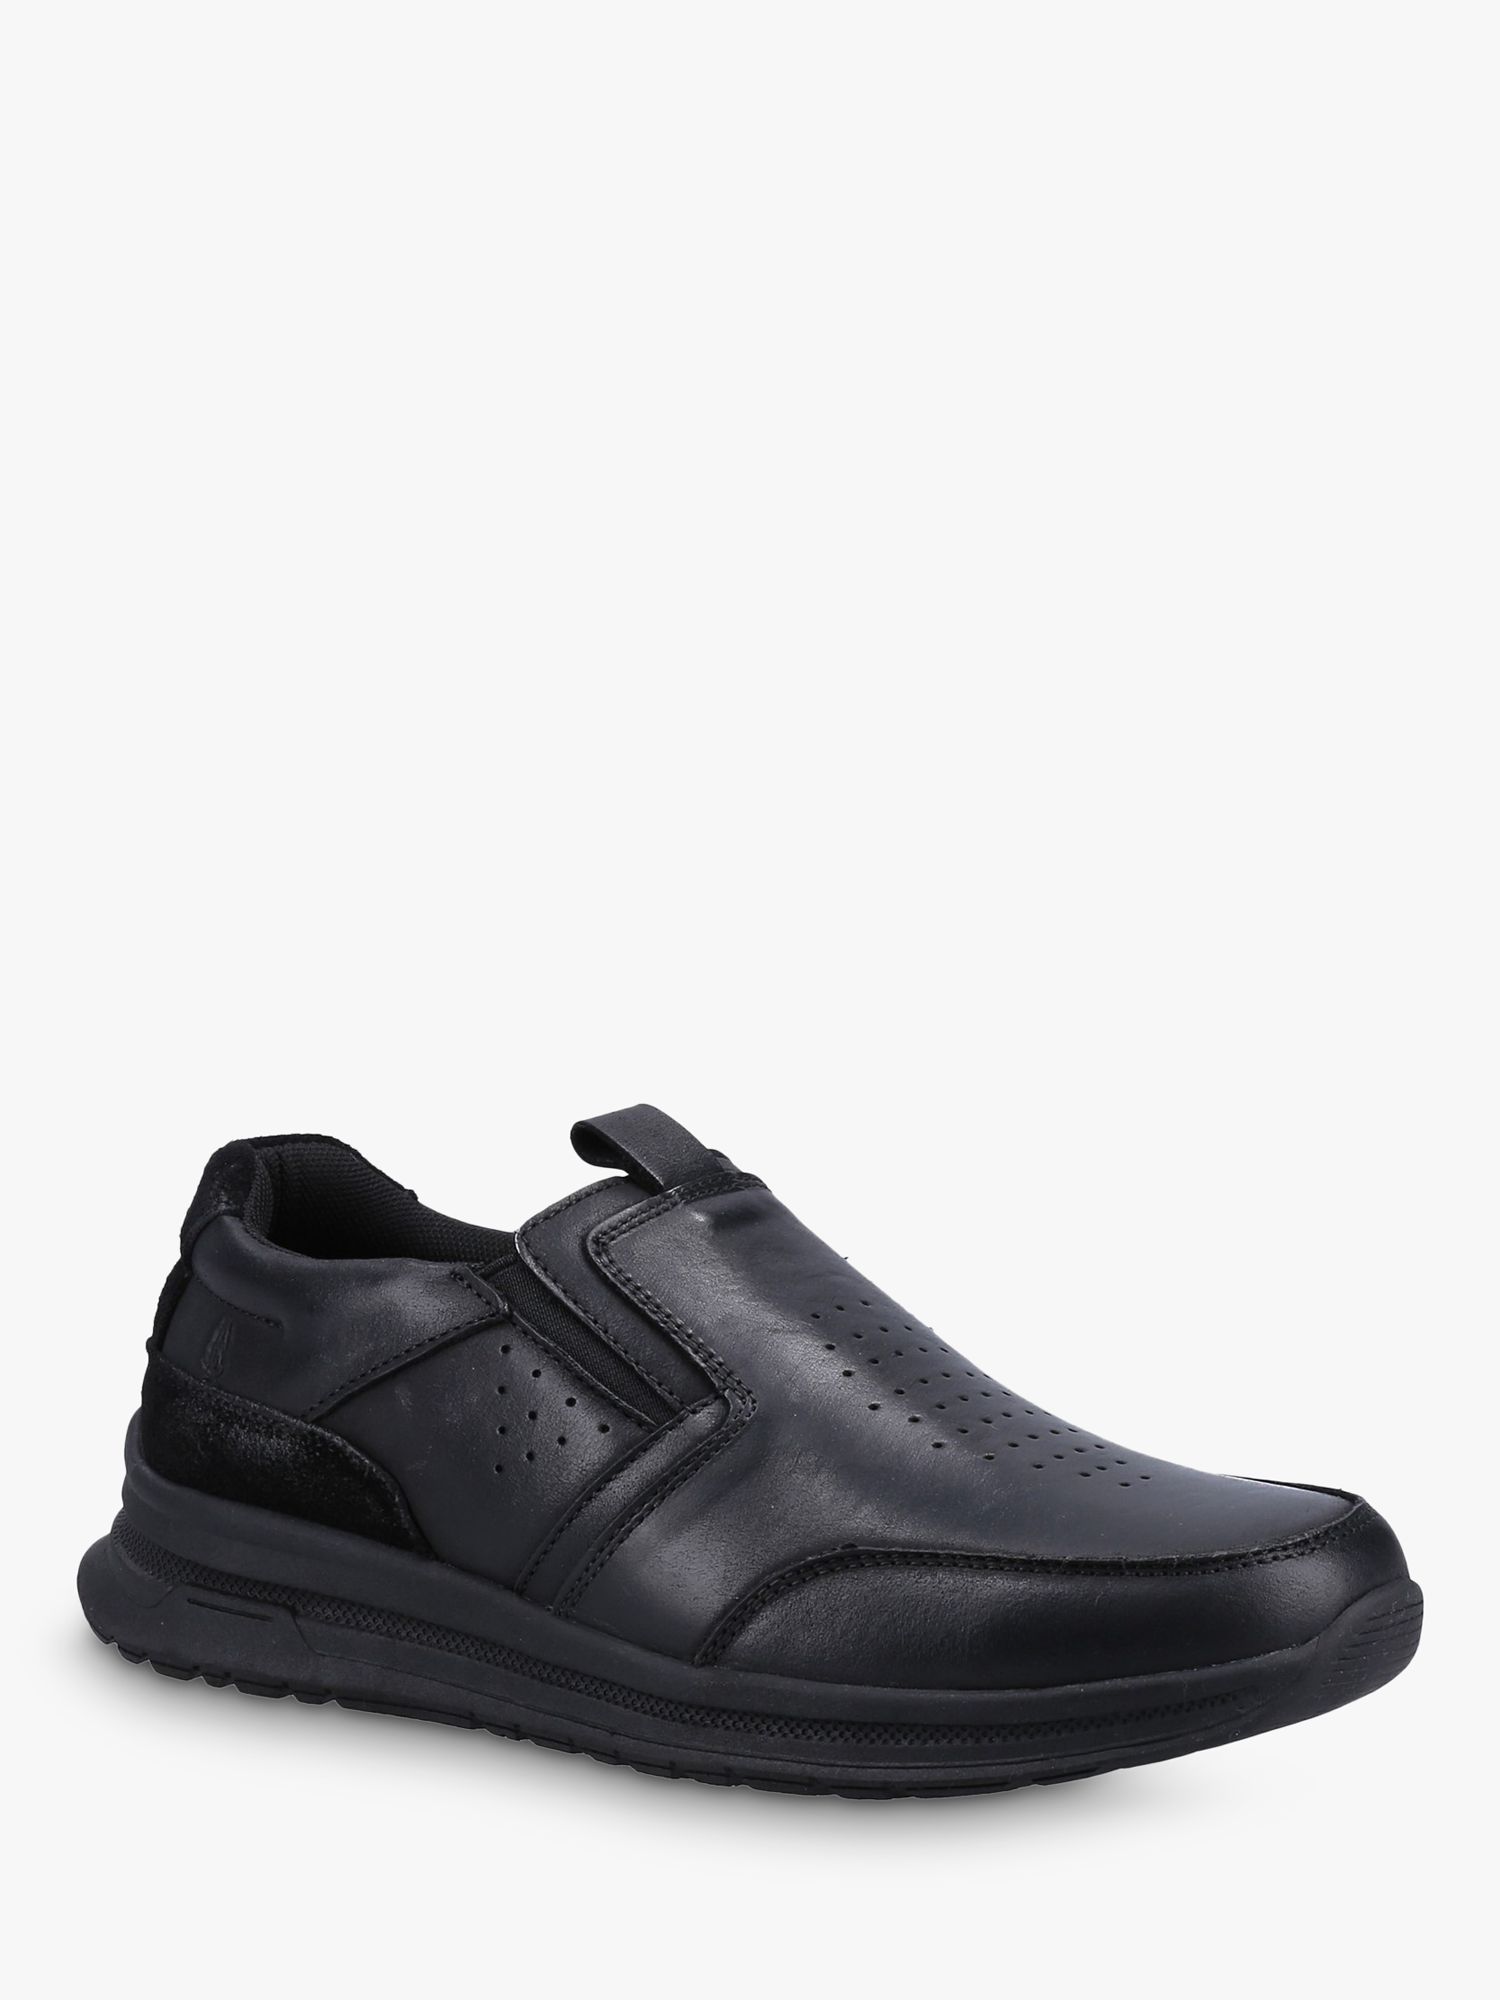 Hush Puppies Cole Leather Slip Shoes, at John Lewis Partners